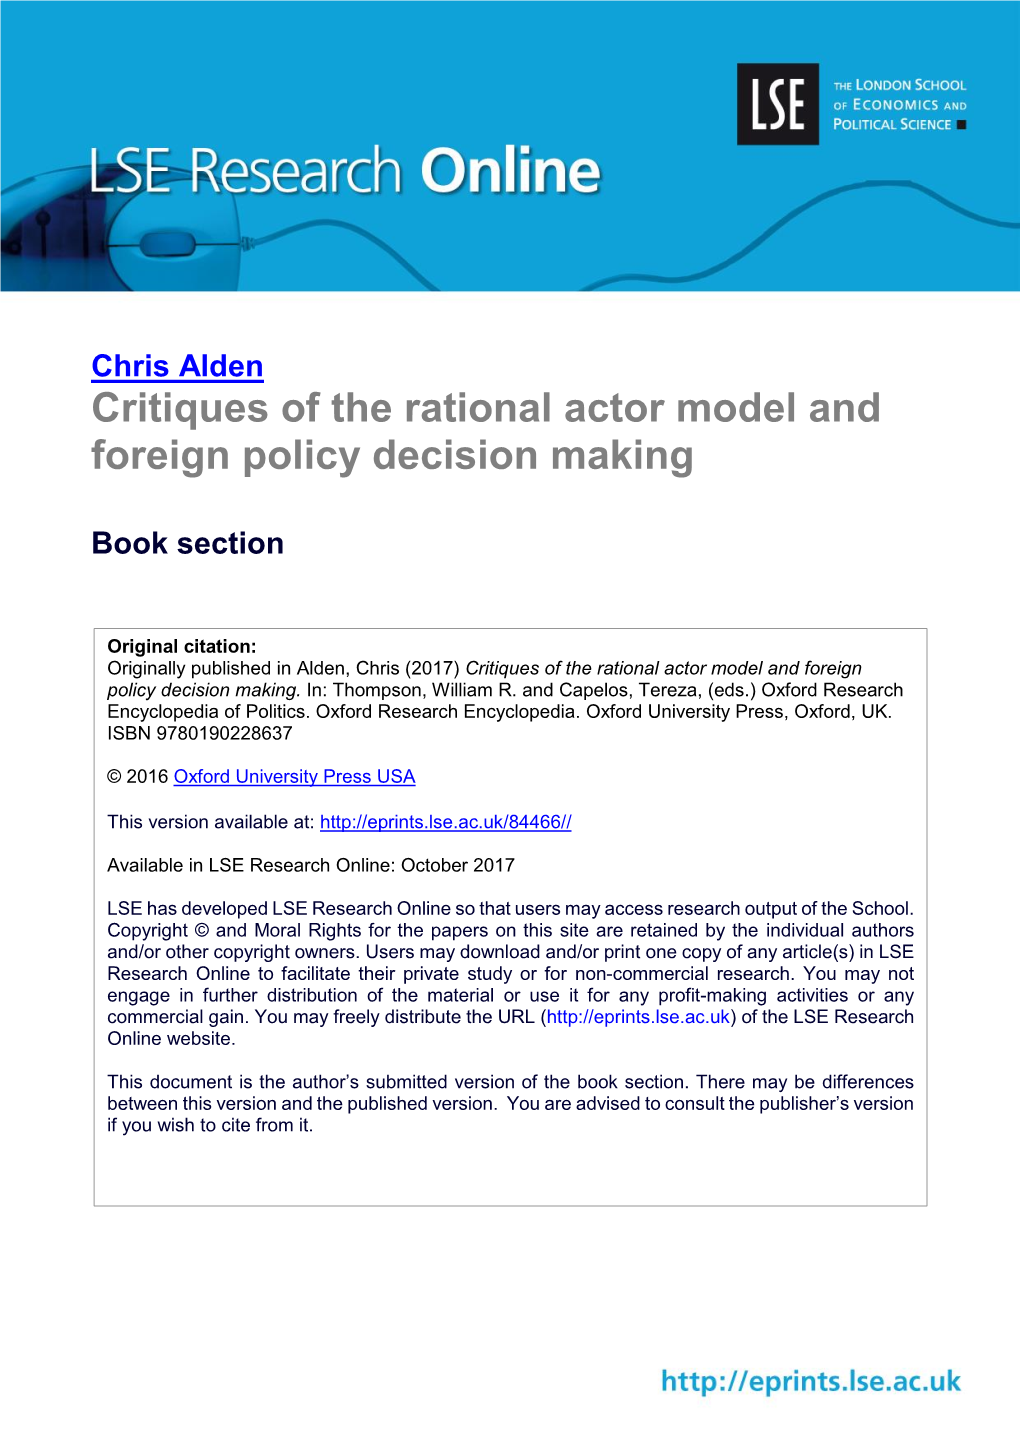 Critiques of the Rational Actor Model and Foreign Policy Decision Making